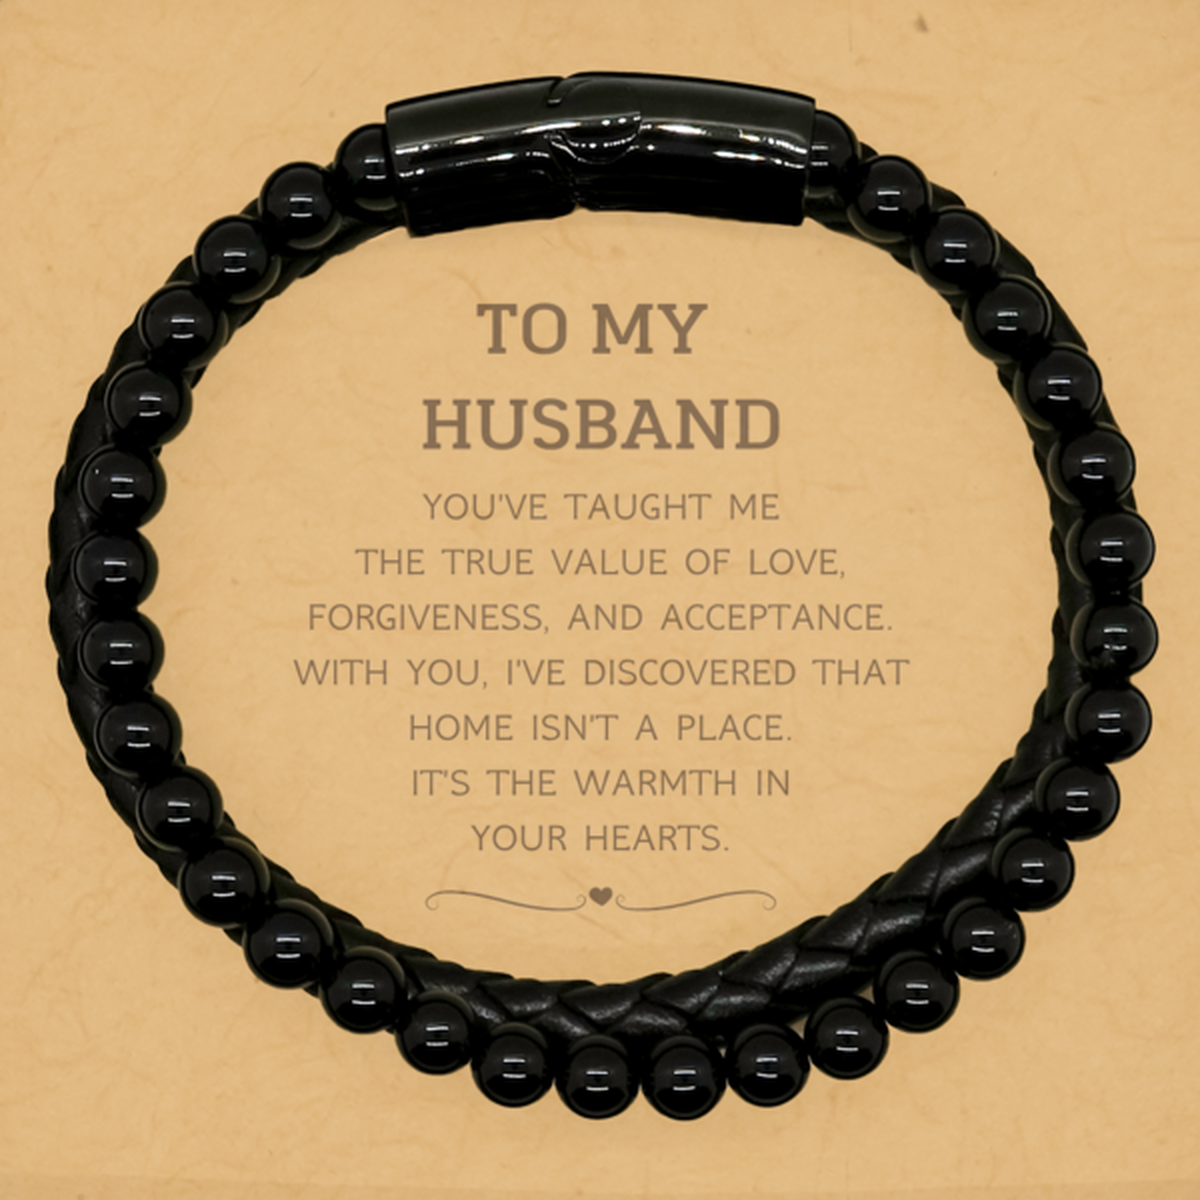 To My Husband Gifts, You've taught me the true value of love, Thank You Gifts For Husband, Birthday Stone Leather Bracelets For Husband